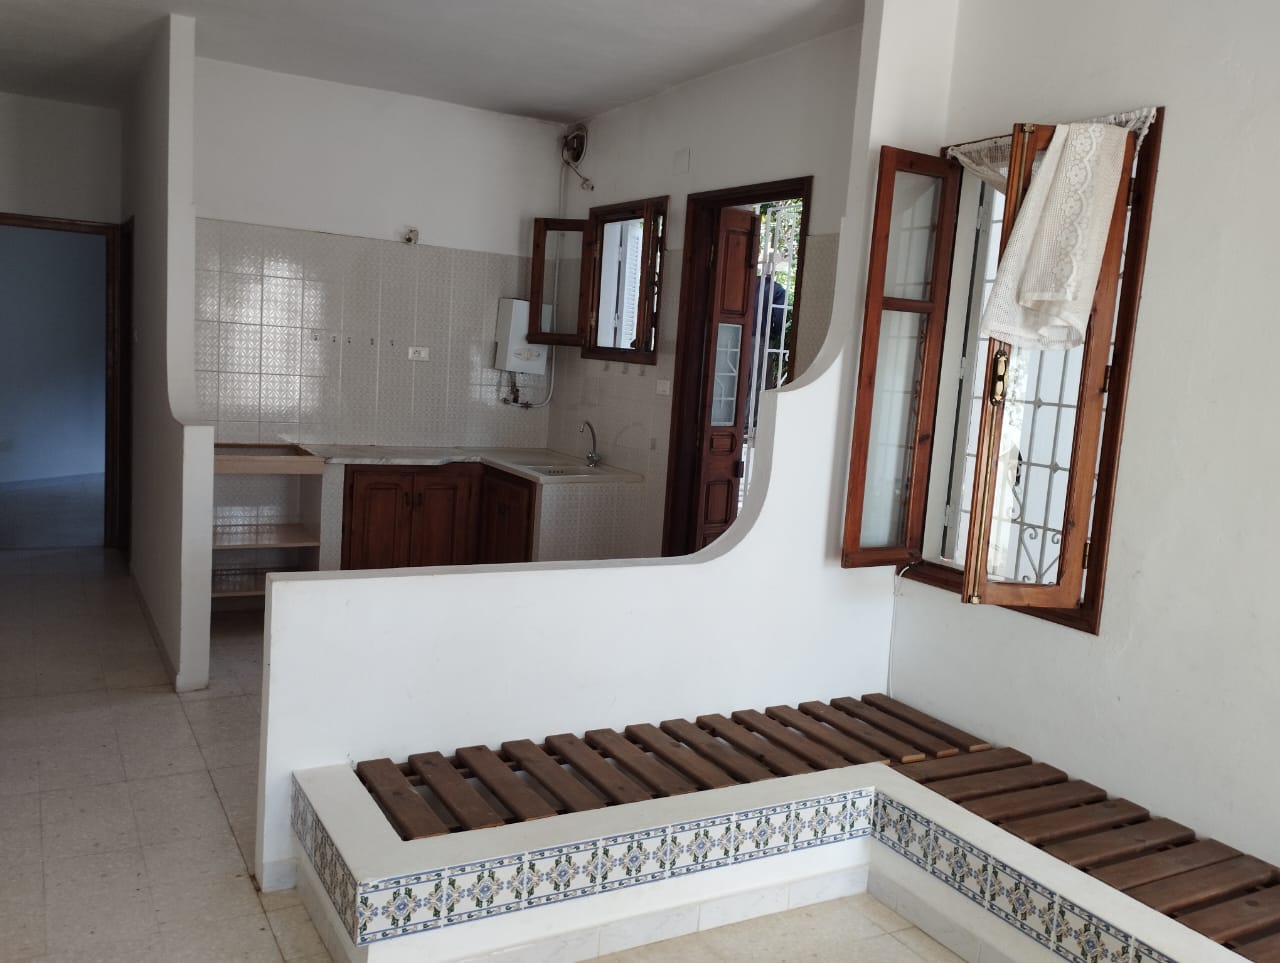 Ras Jebel Rafraf Location Appart. 3 pices Appartement agreable a rafraf